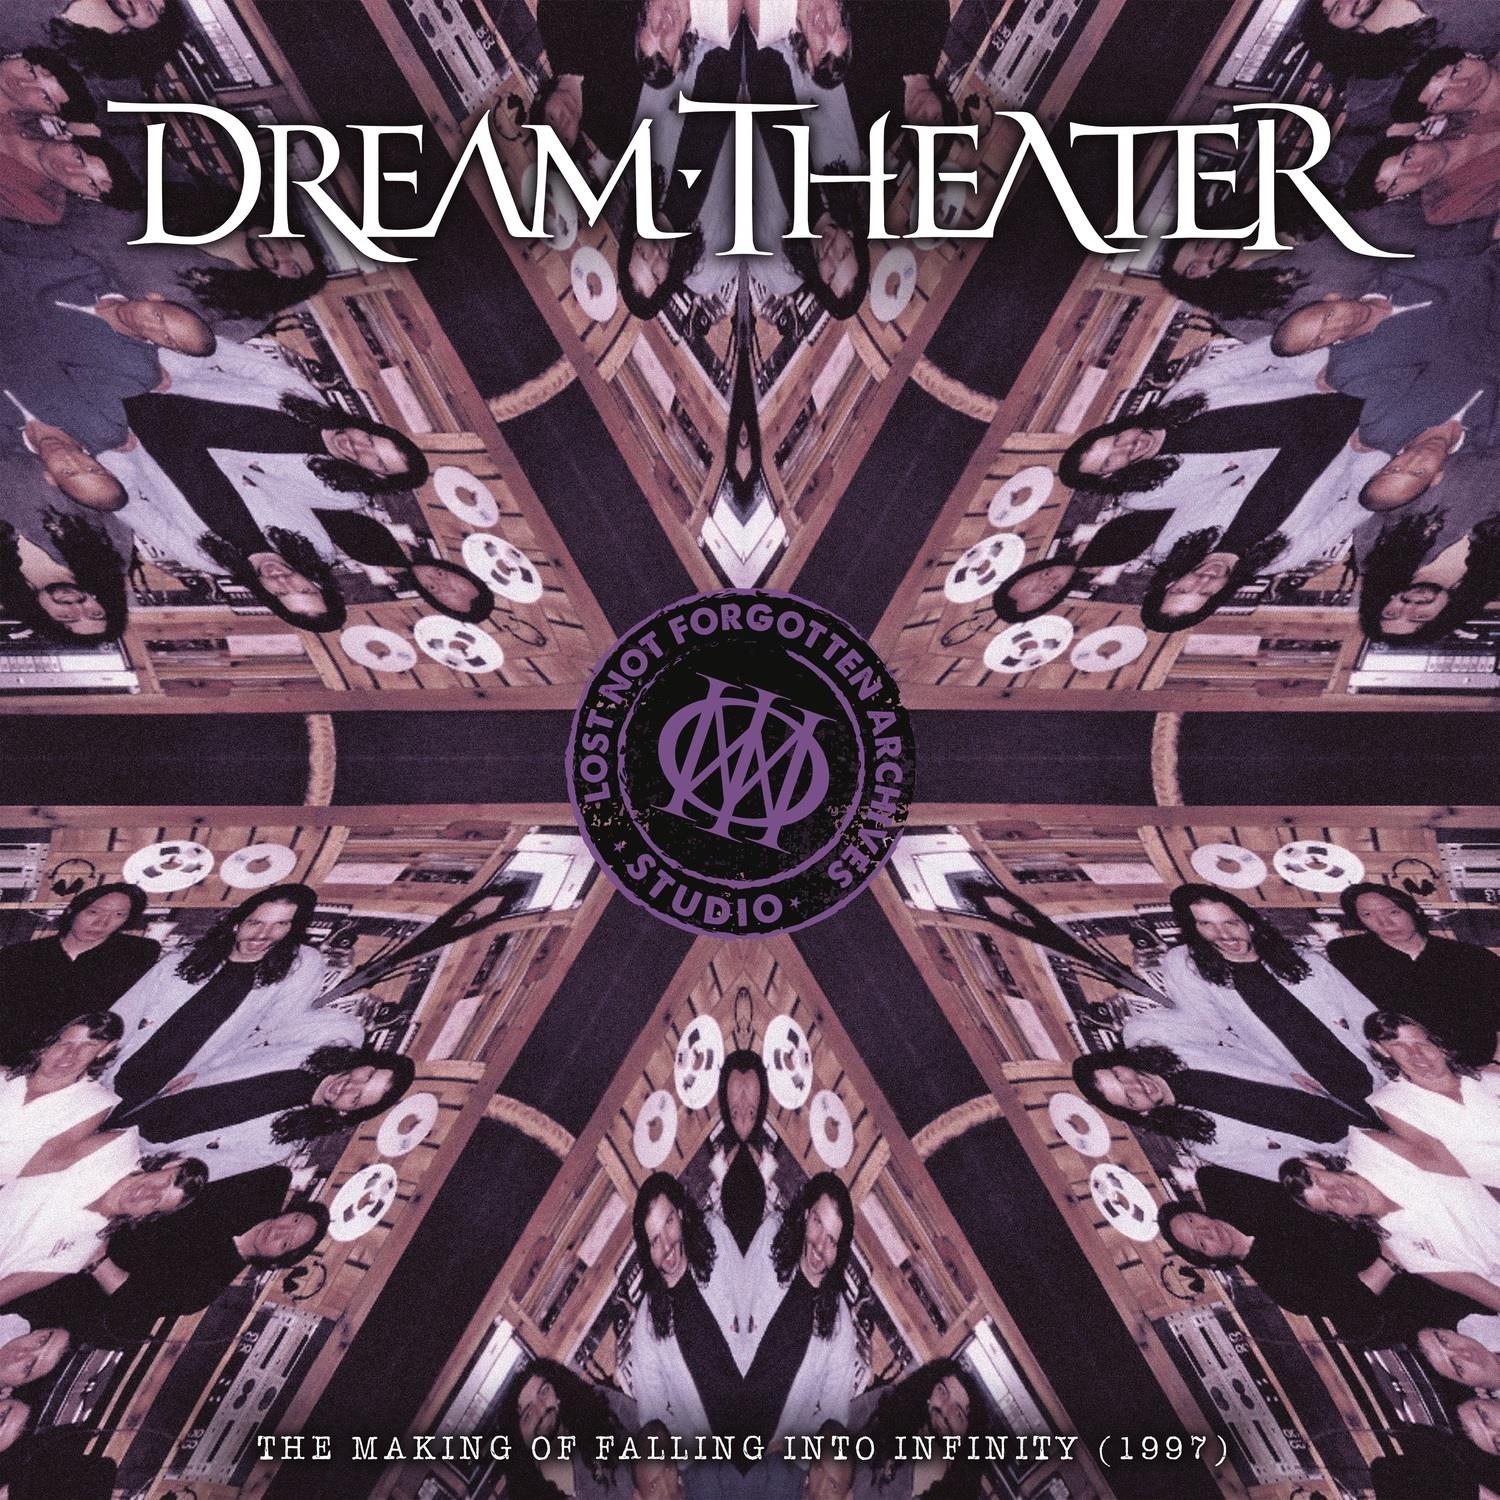 Lost Not Forgotten Archives: The Making Of Falling Into Infinity 1996 by Dream Theater (CD)